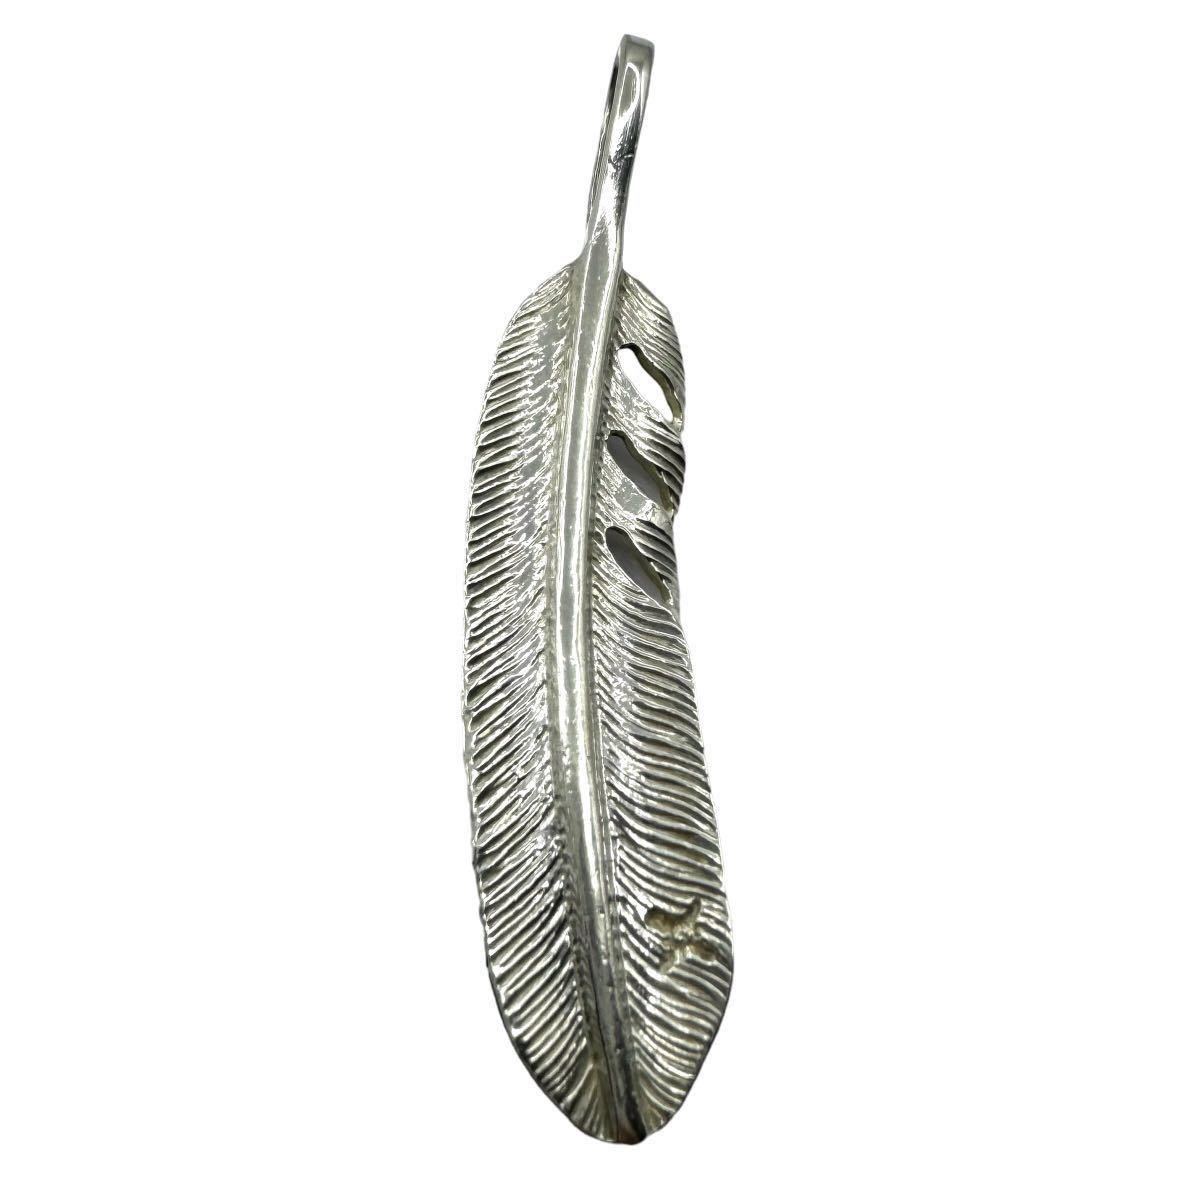  beautiful goods FIRSTARROWS First Arrows P-519 silver SILVER 950 all silver plain feather pendant head charm necklace M left direction 